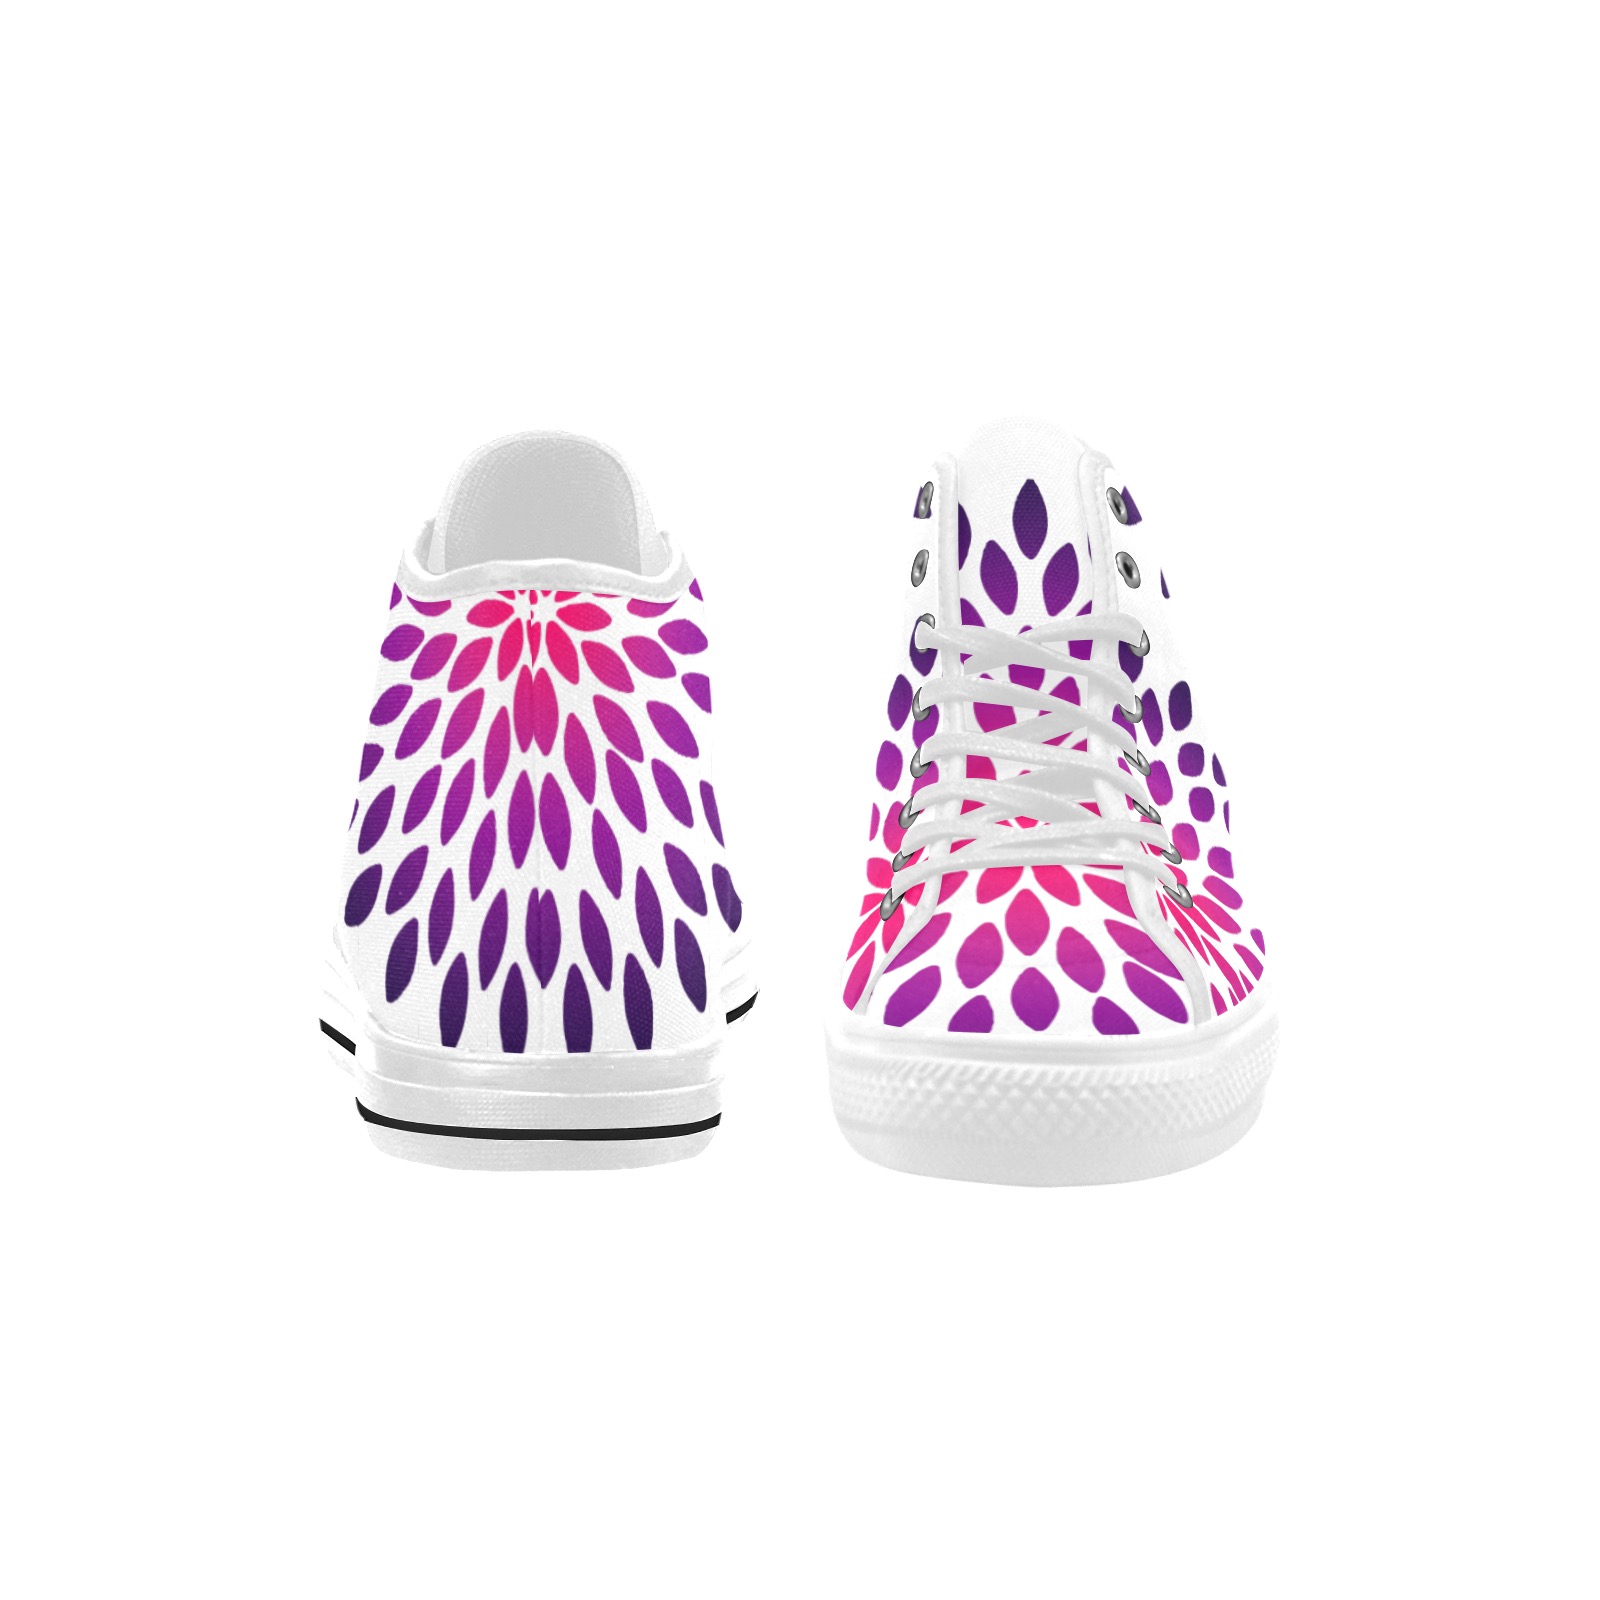 Ô Pink and Violet Zinnia on White Vancouver H Women's Canvas Shoes (1013-1)